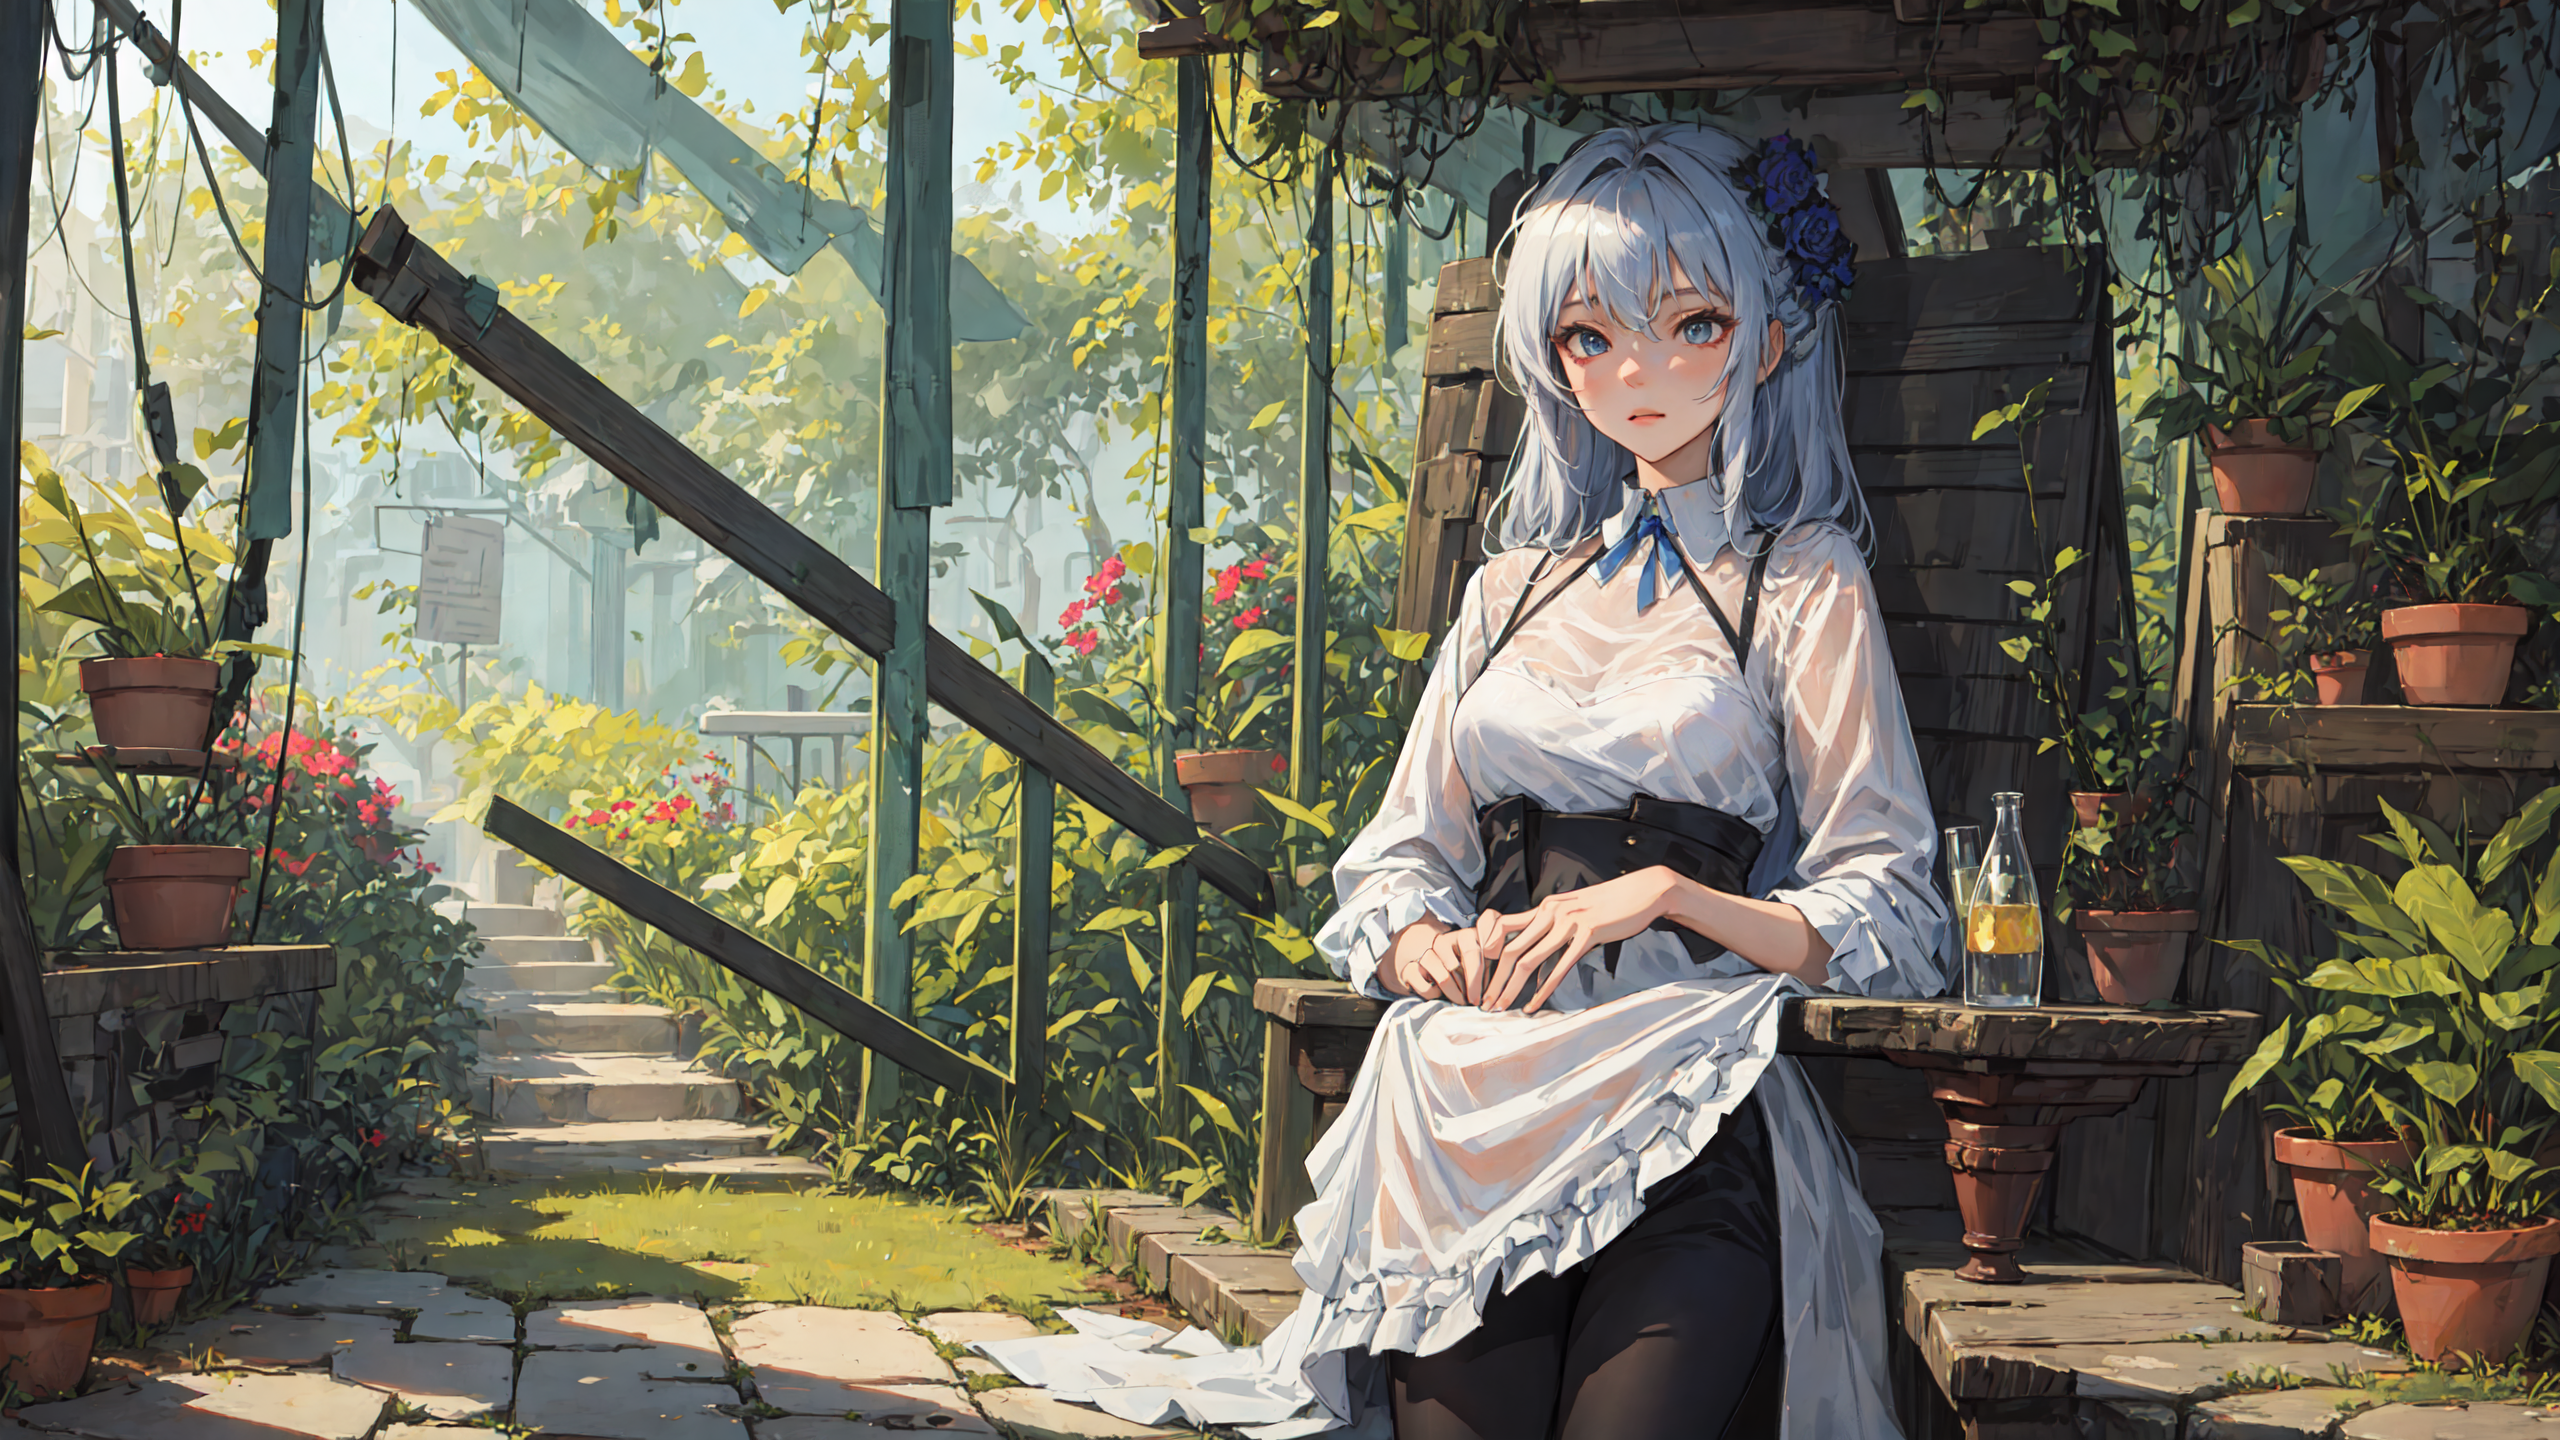 Anime 2560x1440 women anime girls garden plants flowers leaves blue hair translucent blue eyes black pants stairs looking at viewer AI art